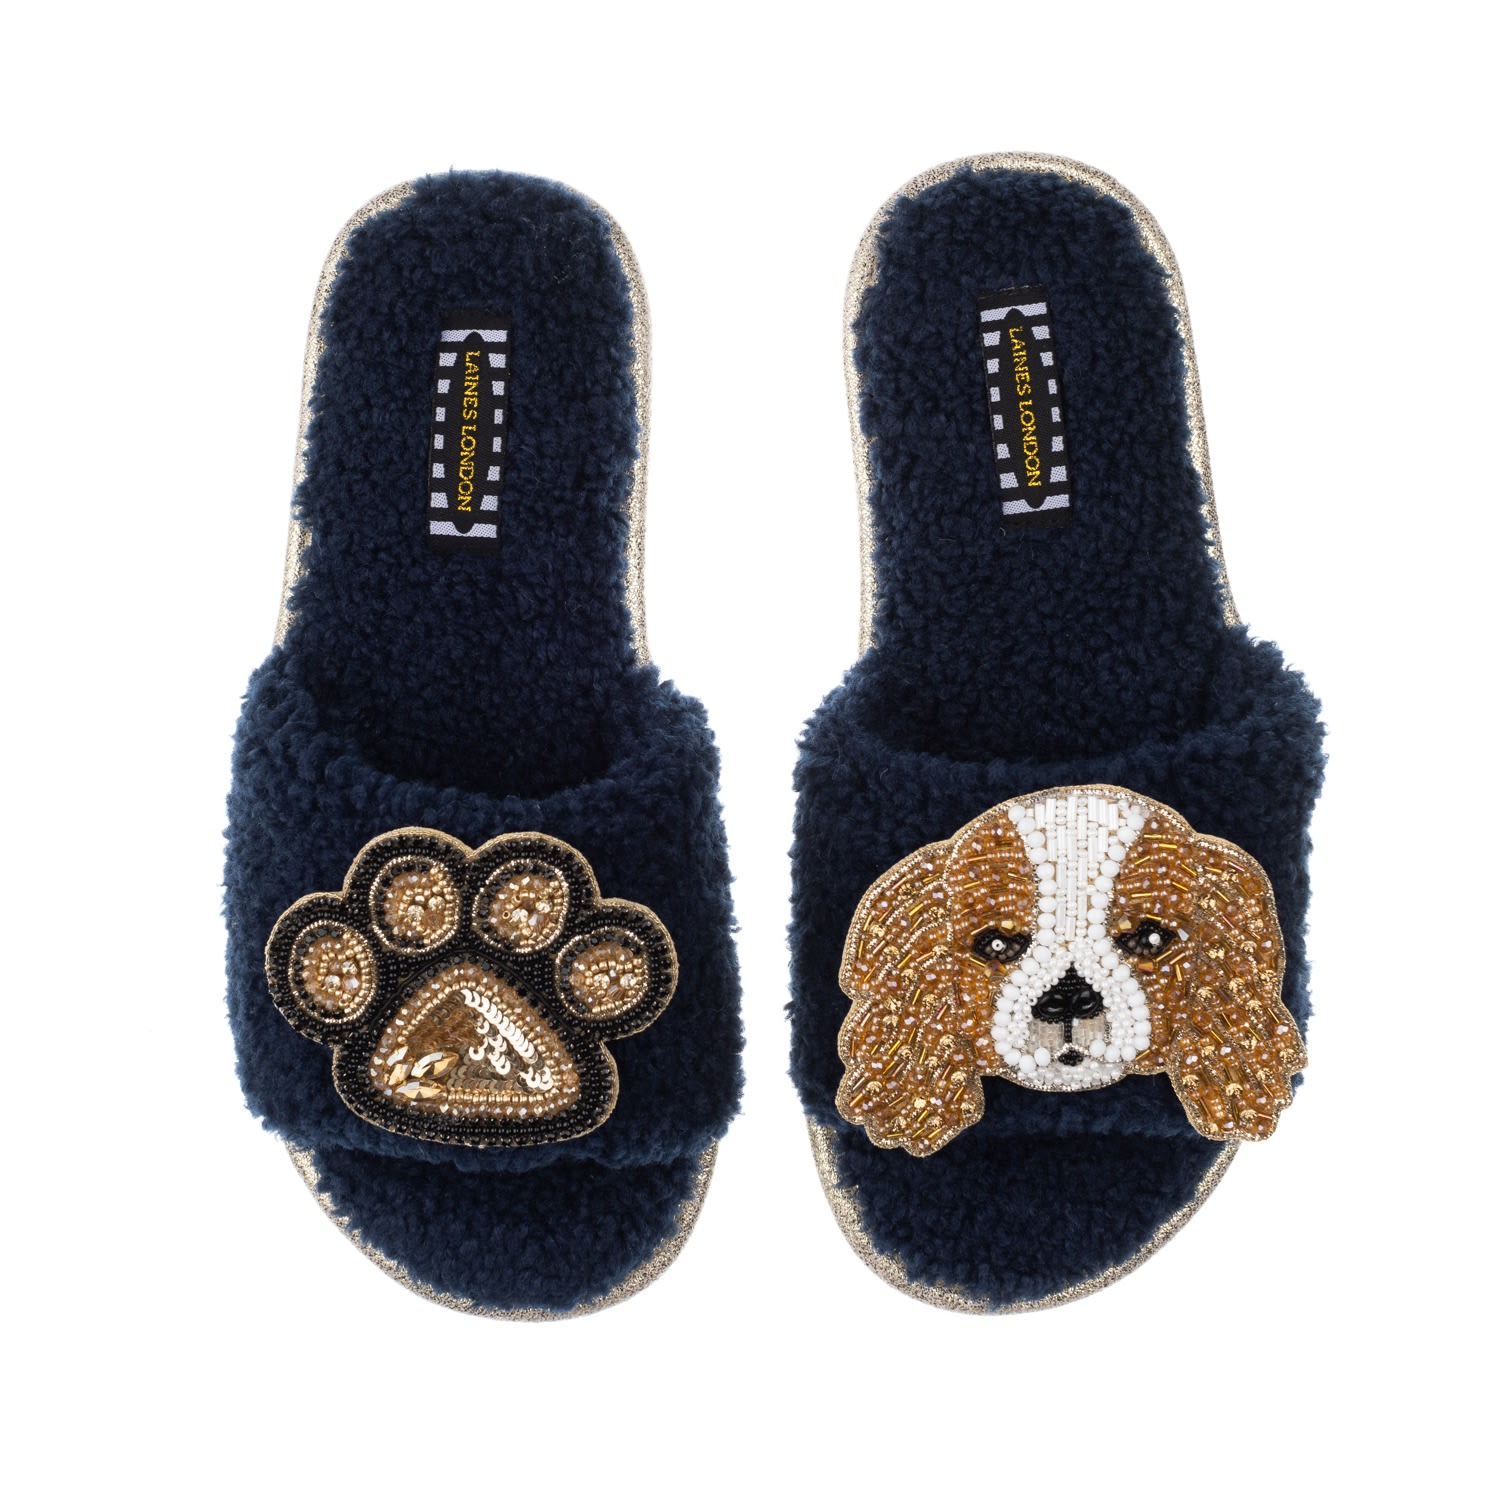 Blue Teddy Towelling Slipper Sliders With Lady Spaniel & Paw Brooches - Navy Small Laines London